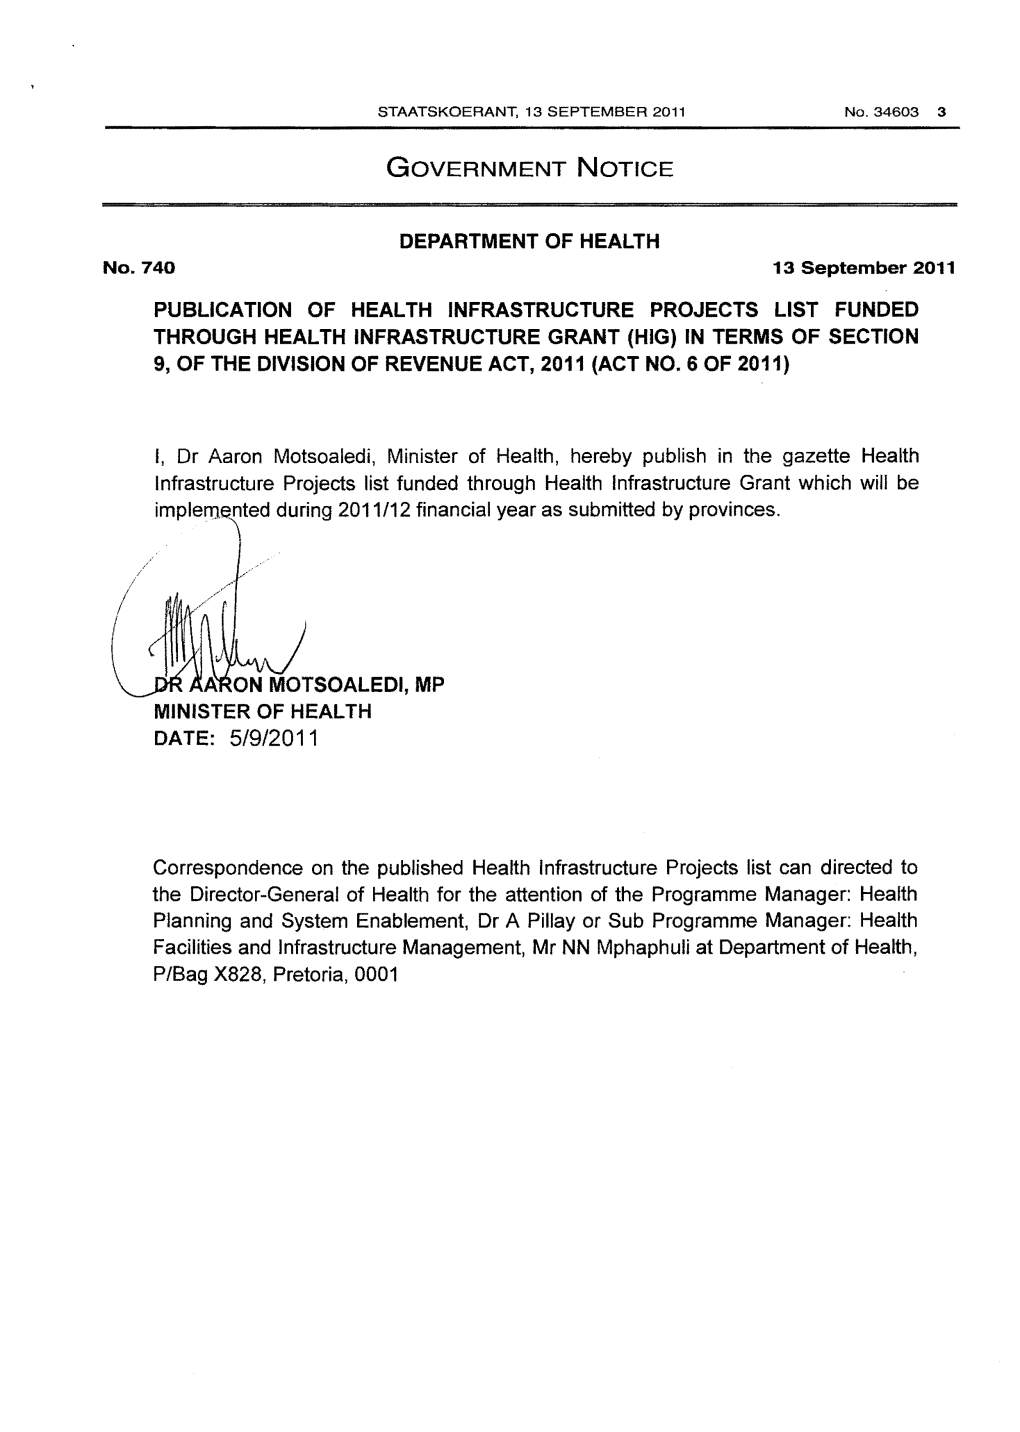 Division of Revenue Act: Publication of Health Infrastructure Projects List